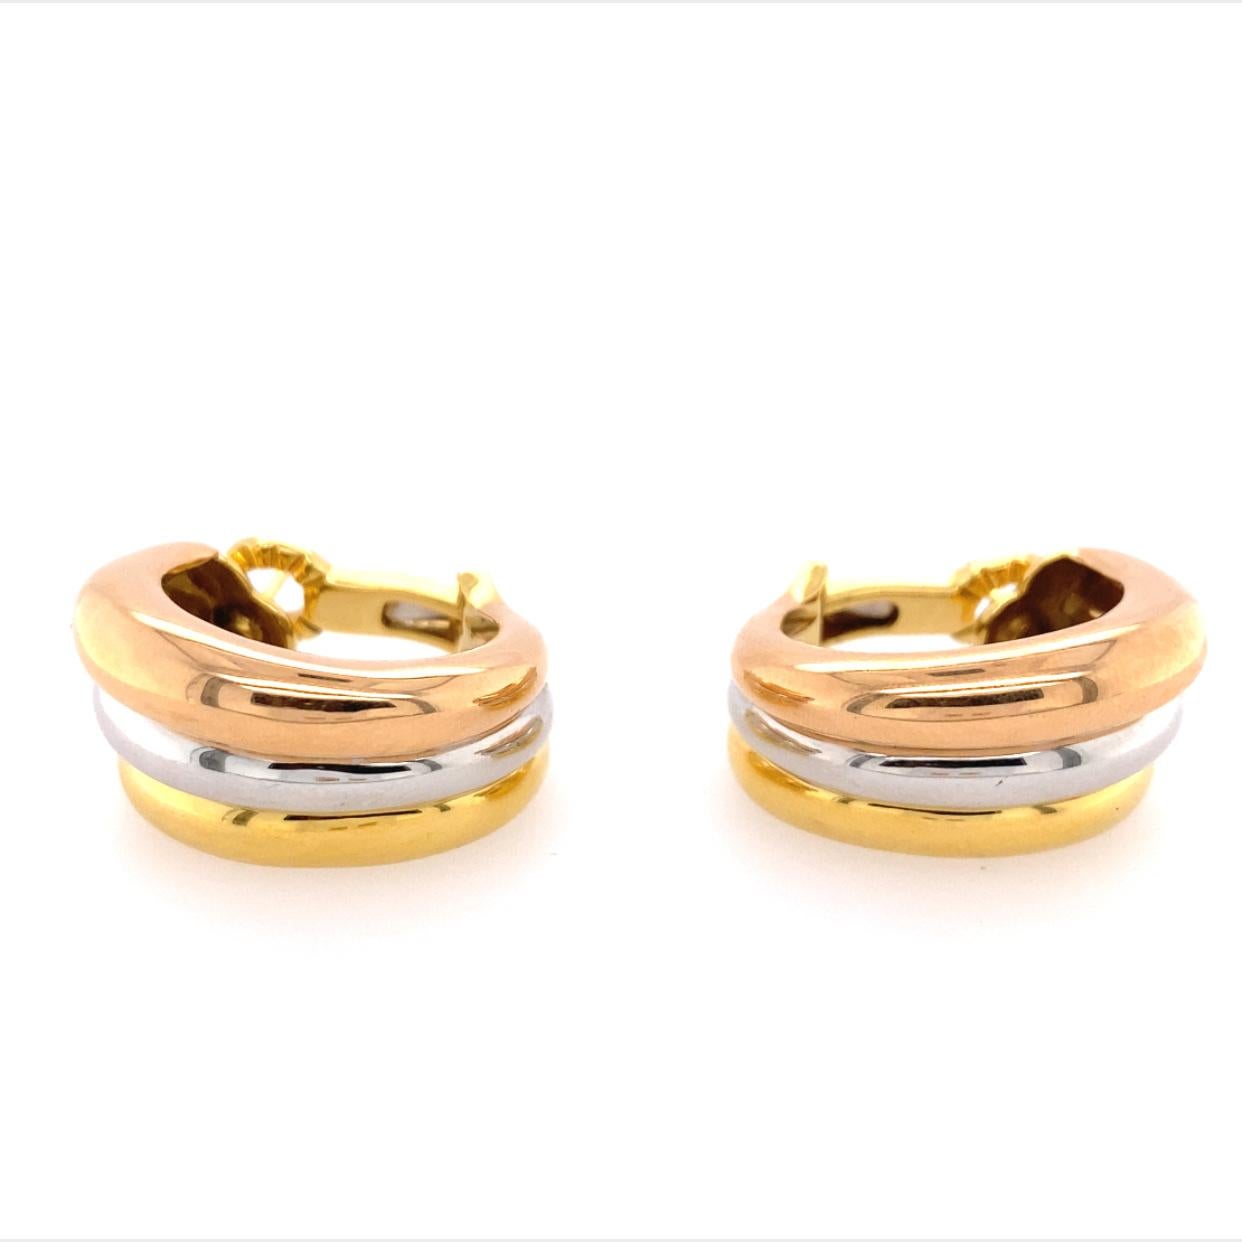 Cartier 18k Trinity Hoop Earrings 
With Tri-color Yellow Gold, Rose Gold and white Gold. 
Nice Large Size and beautifully made. 
Length 14mm at its widest point.
